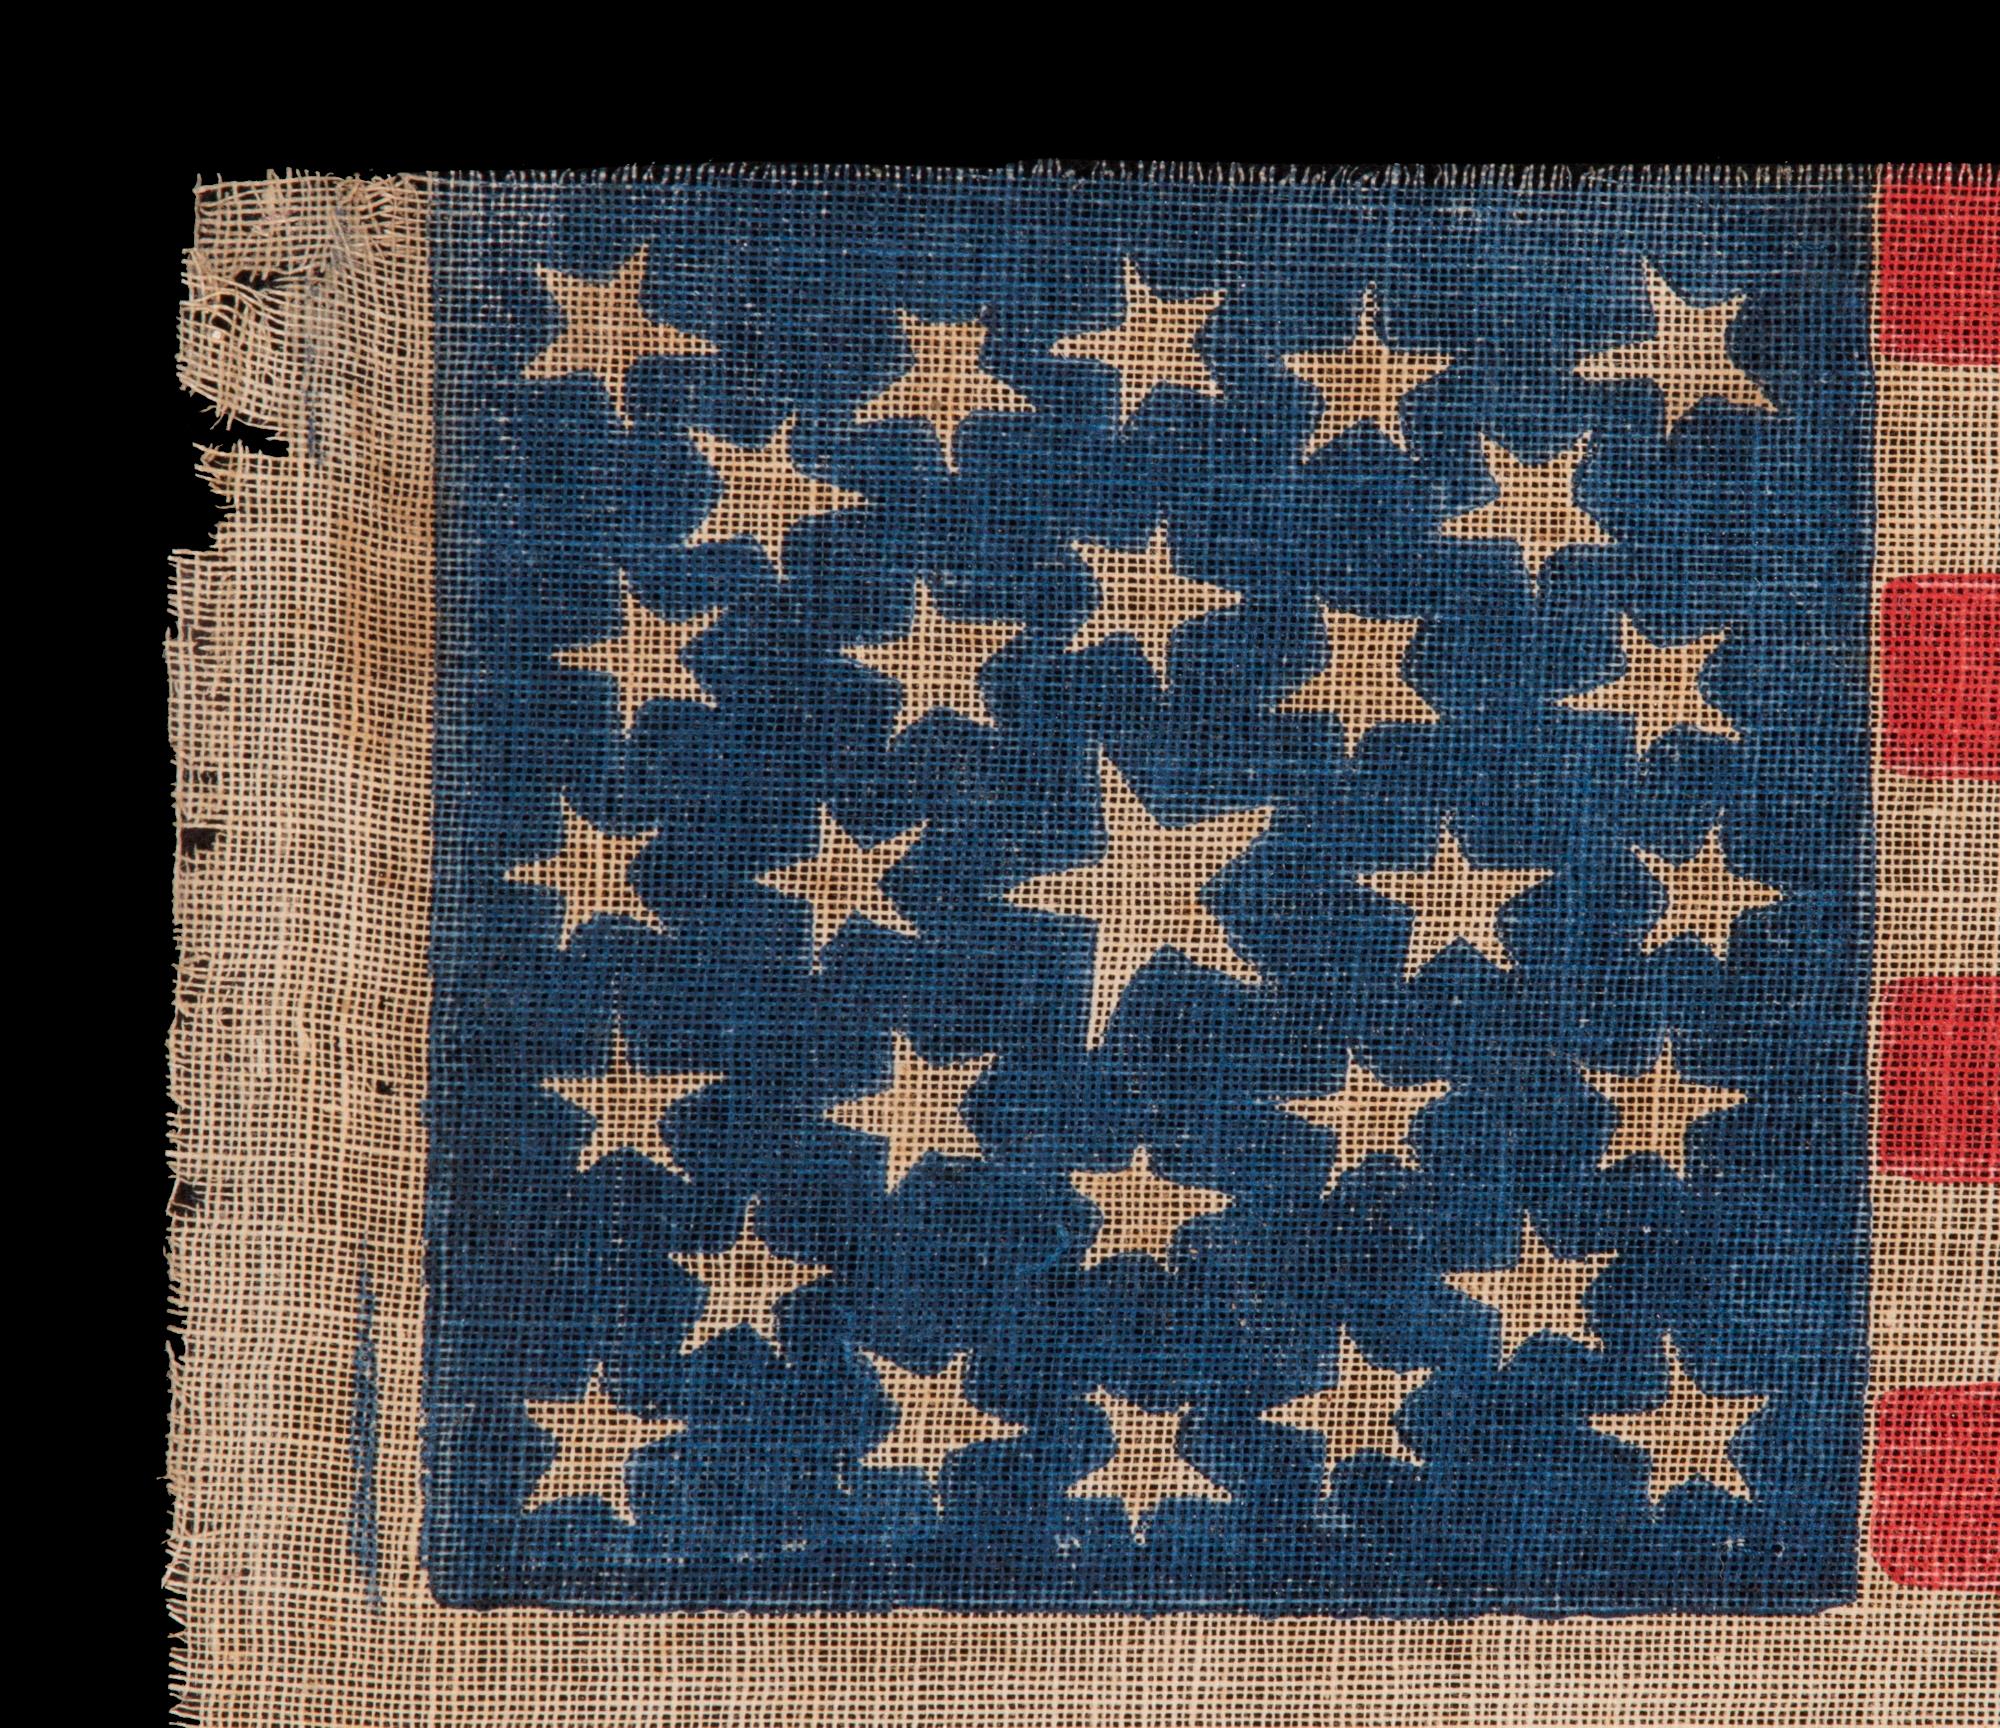 29 STAR ANTIQUE AMERICAN FLAG WITH A DOUBLE-WREATH STYLE MEDALLION CONFIGURATION, MEXICAN WAR ERA, 1846-48; REFLECTS THE ADDITION OF IOWA AS THE 29TH STATE

29 star American national parade flag, printed on coarse, glazed cotton. The stars are